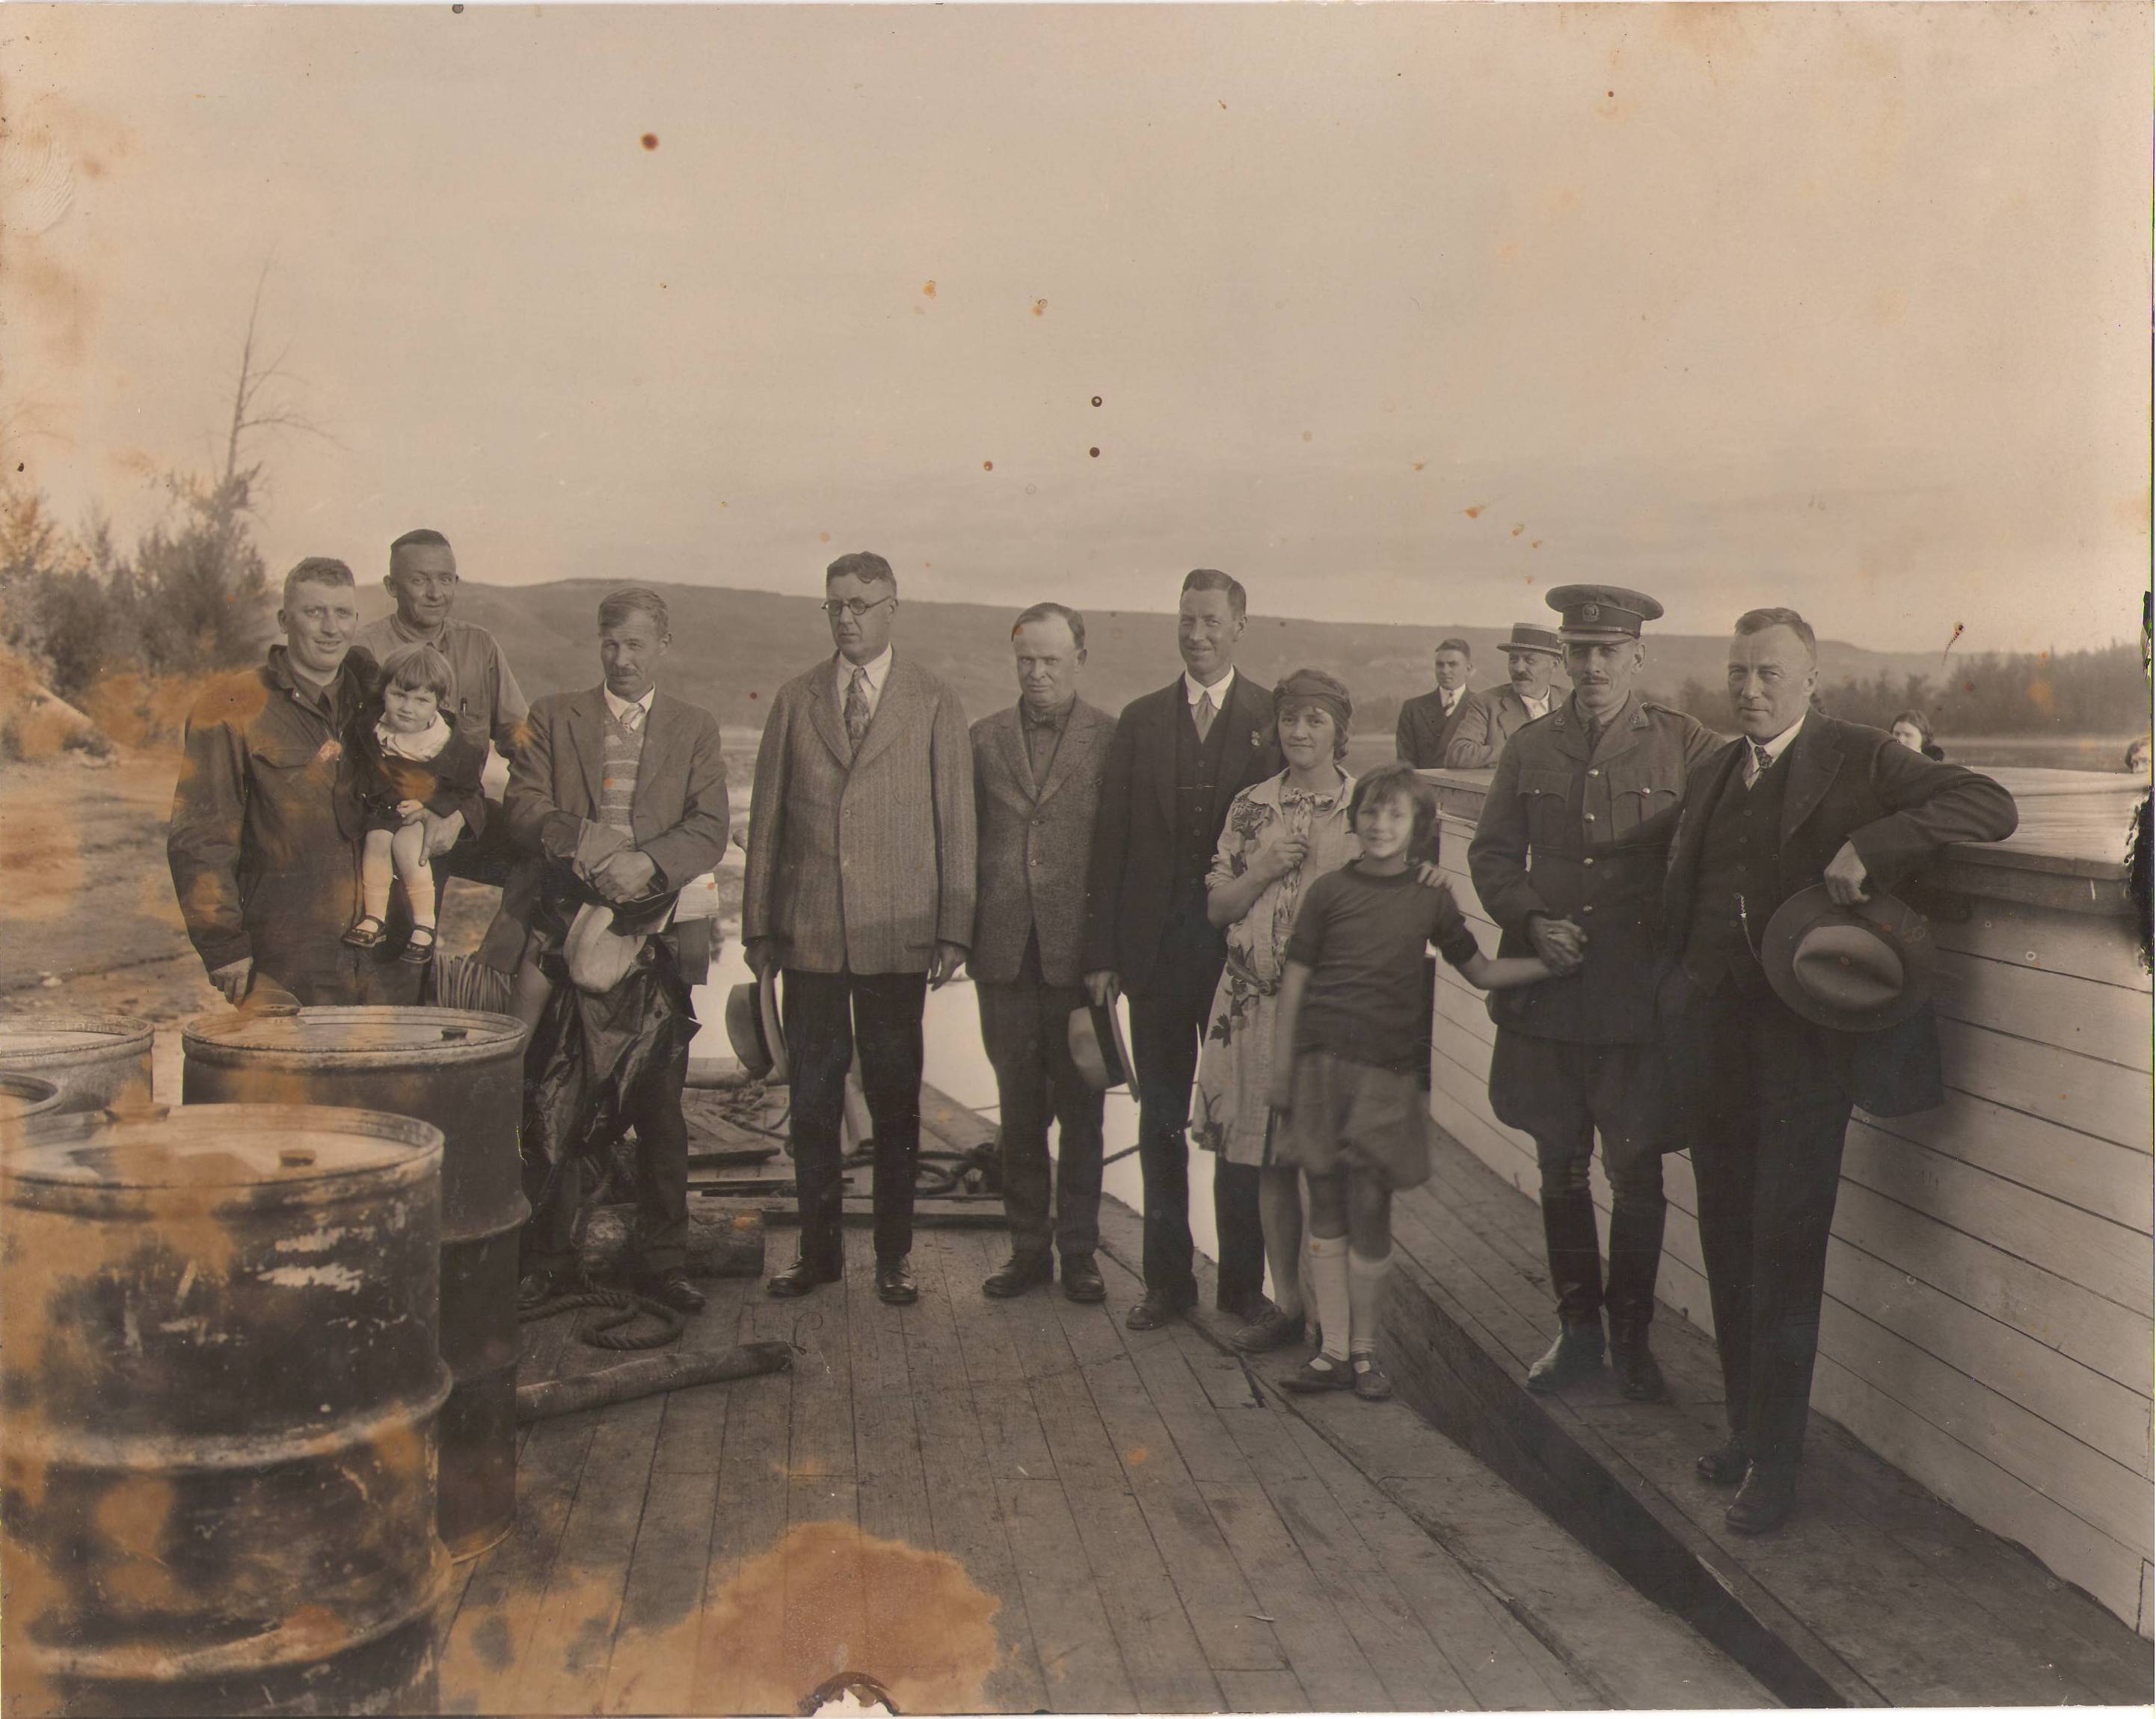 This week we have a large group of unknown individuals. They appear to be on the deck of a ship, and, noting the hills in the back, are likely closer to Peace River. We can identify the gentleman in glasses as Premier Brownlee who toured this northern area in 1929. If you recognize any of the others please let us know!
995.25.1 / Heritage Committee FVAS